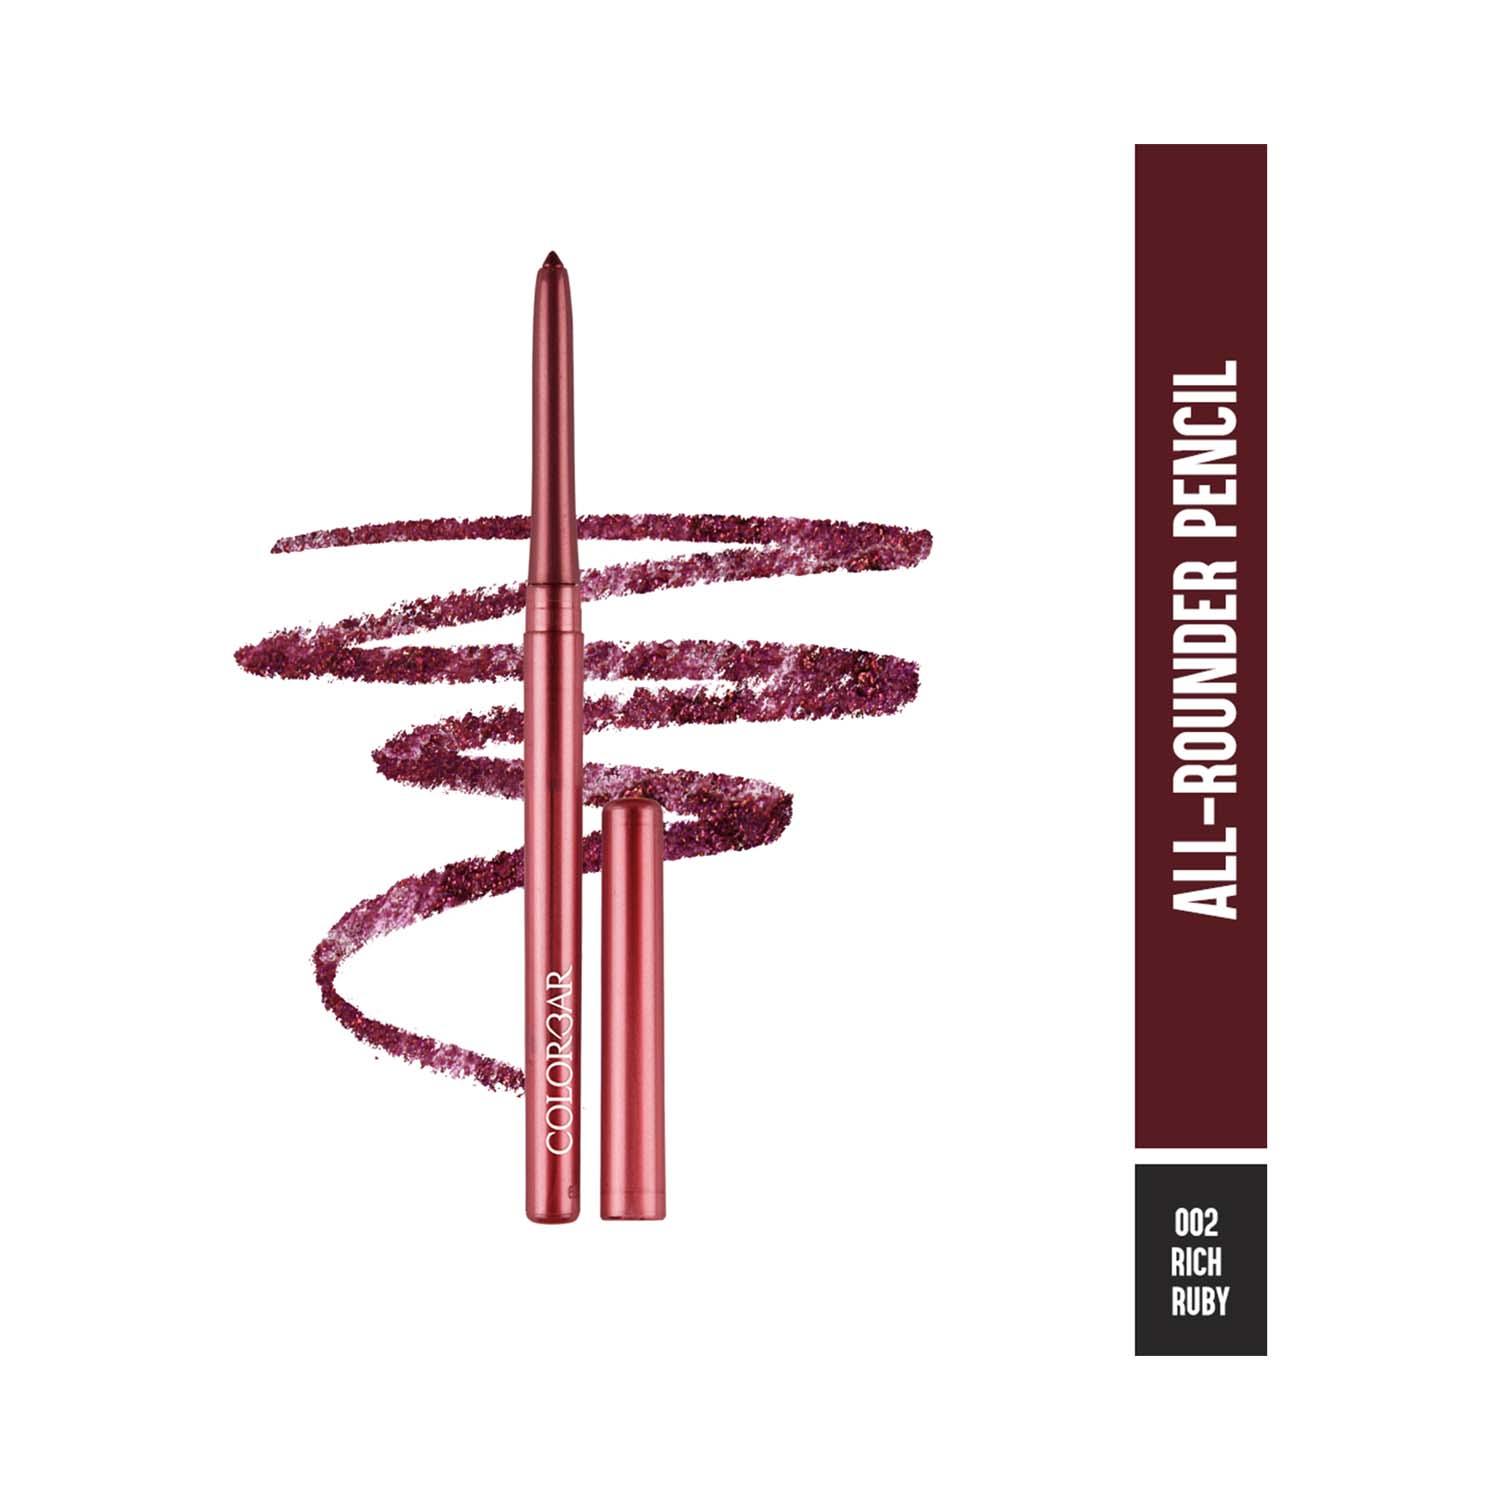 Colorbar | Colorbar All-Rounder Pencil - Rich Ruby - [002] (0.29 g)